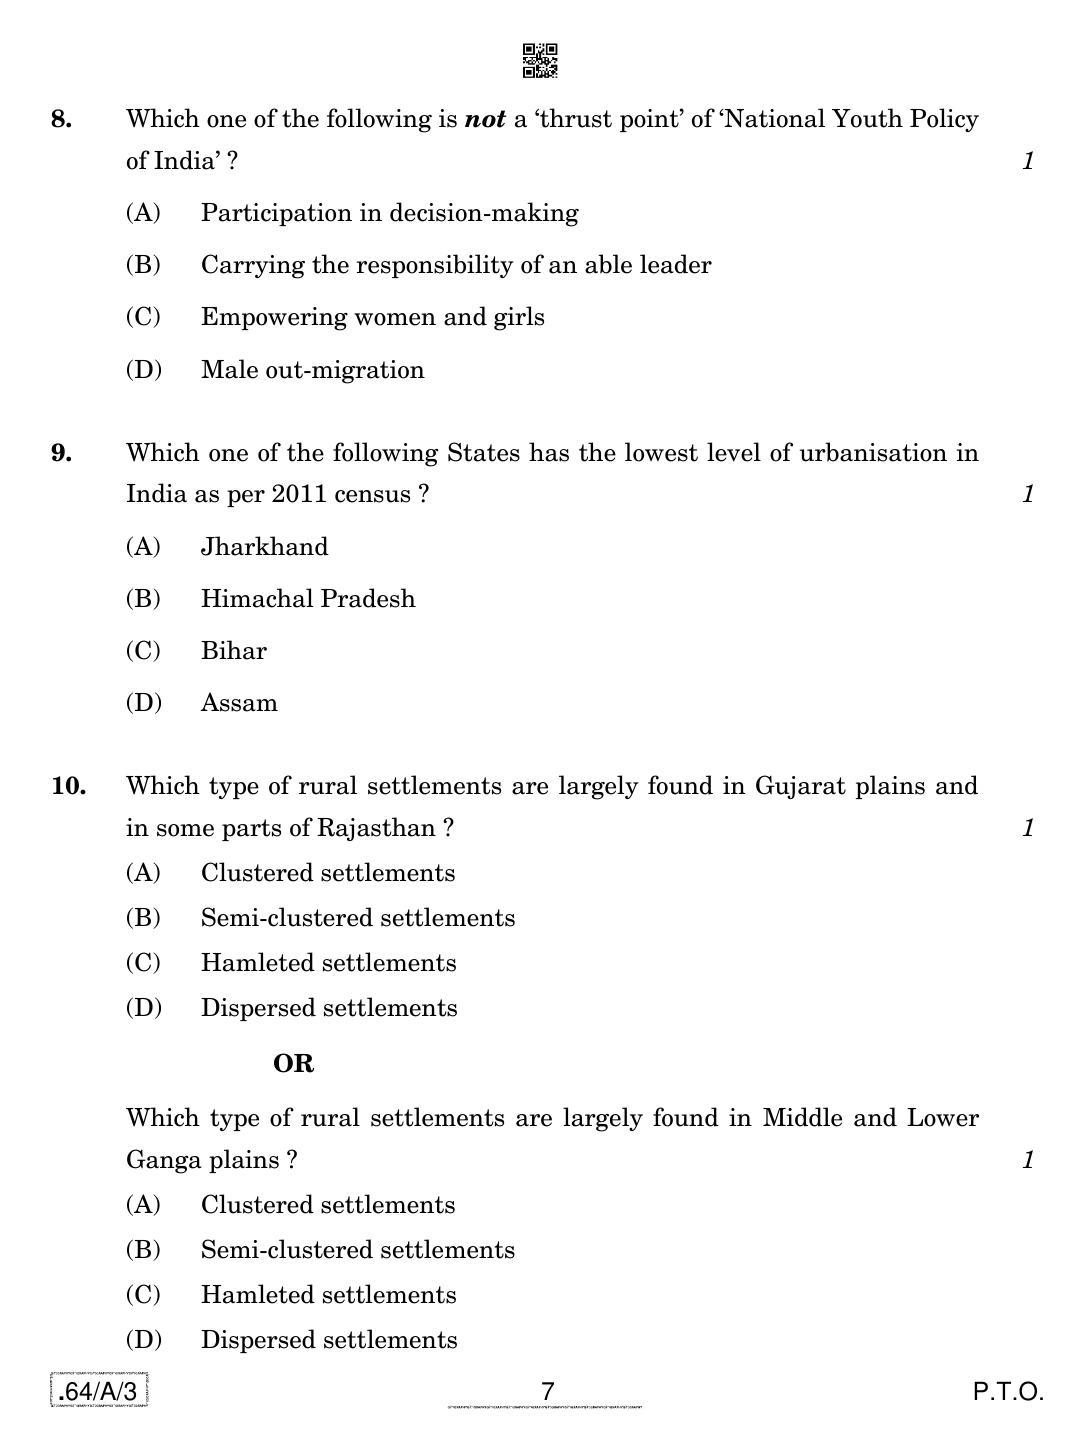 CBSE Class 12 64-C-3 - Geography 2020 Compartment Question Paper - Page 7